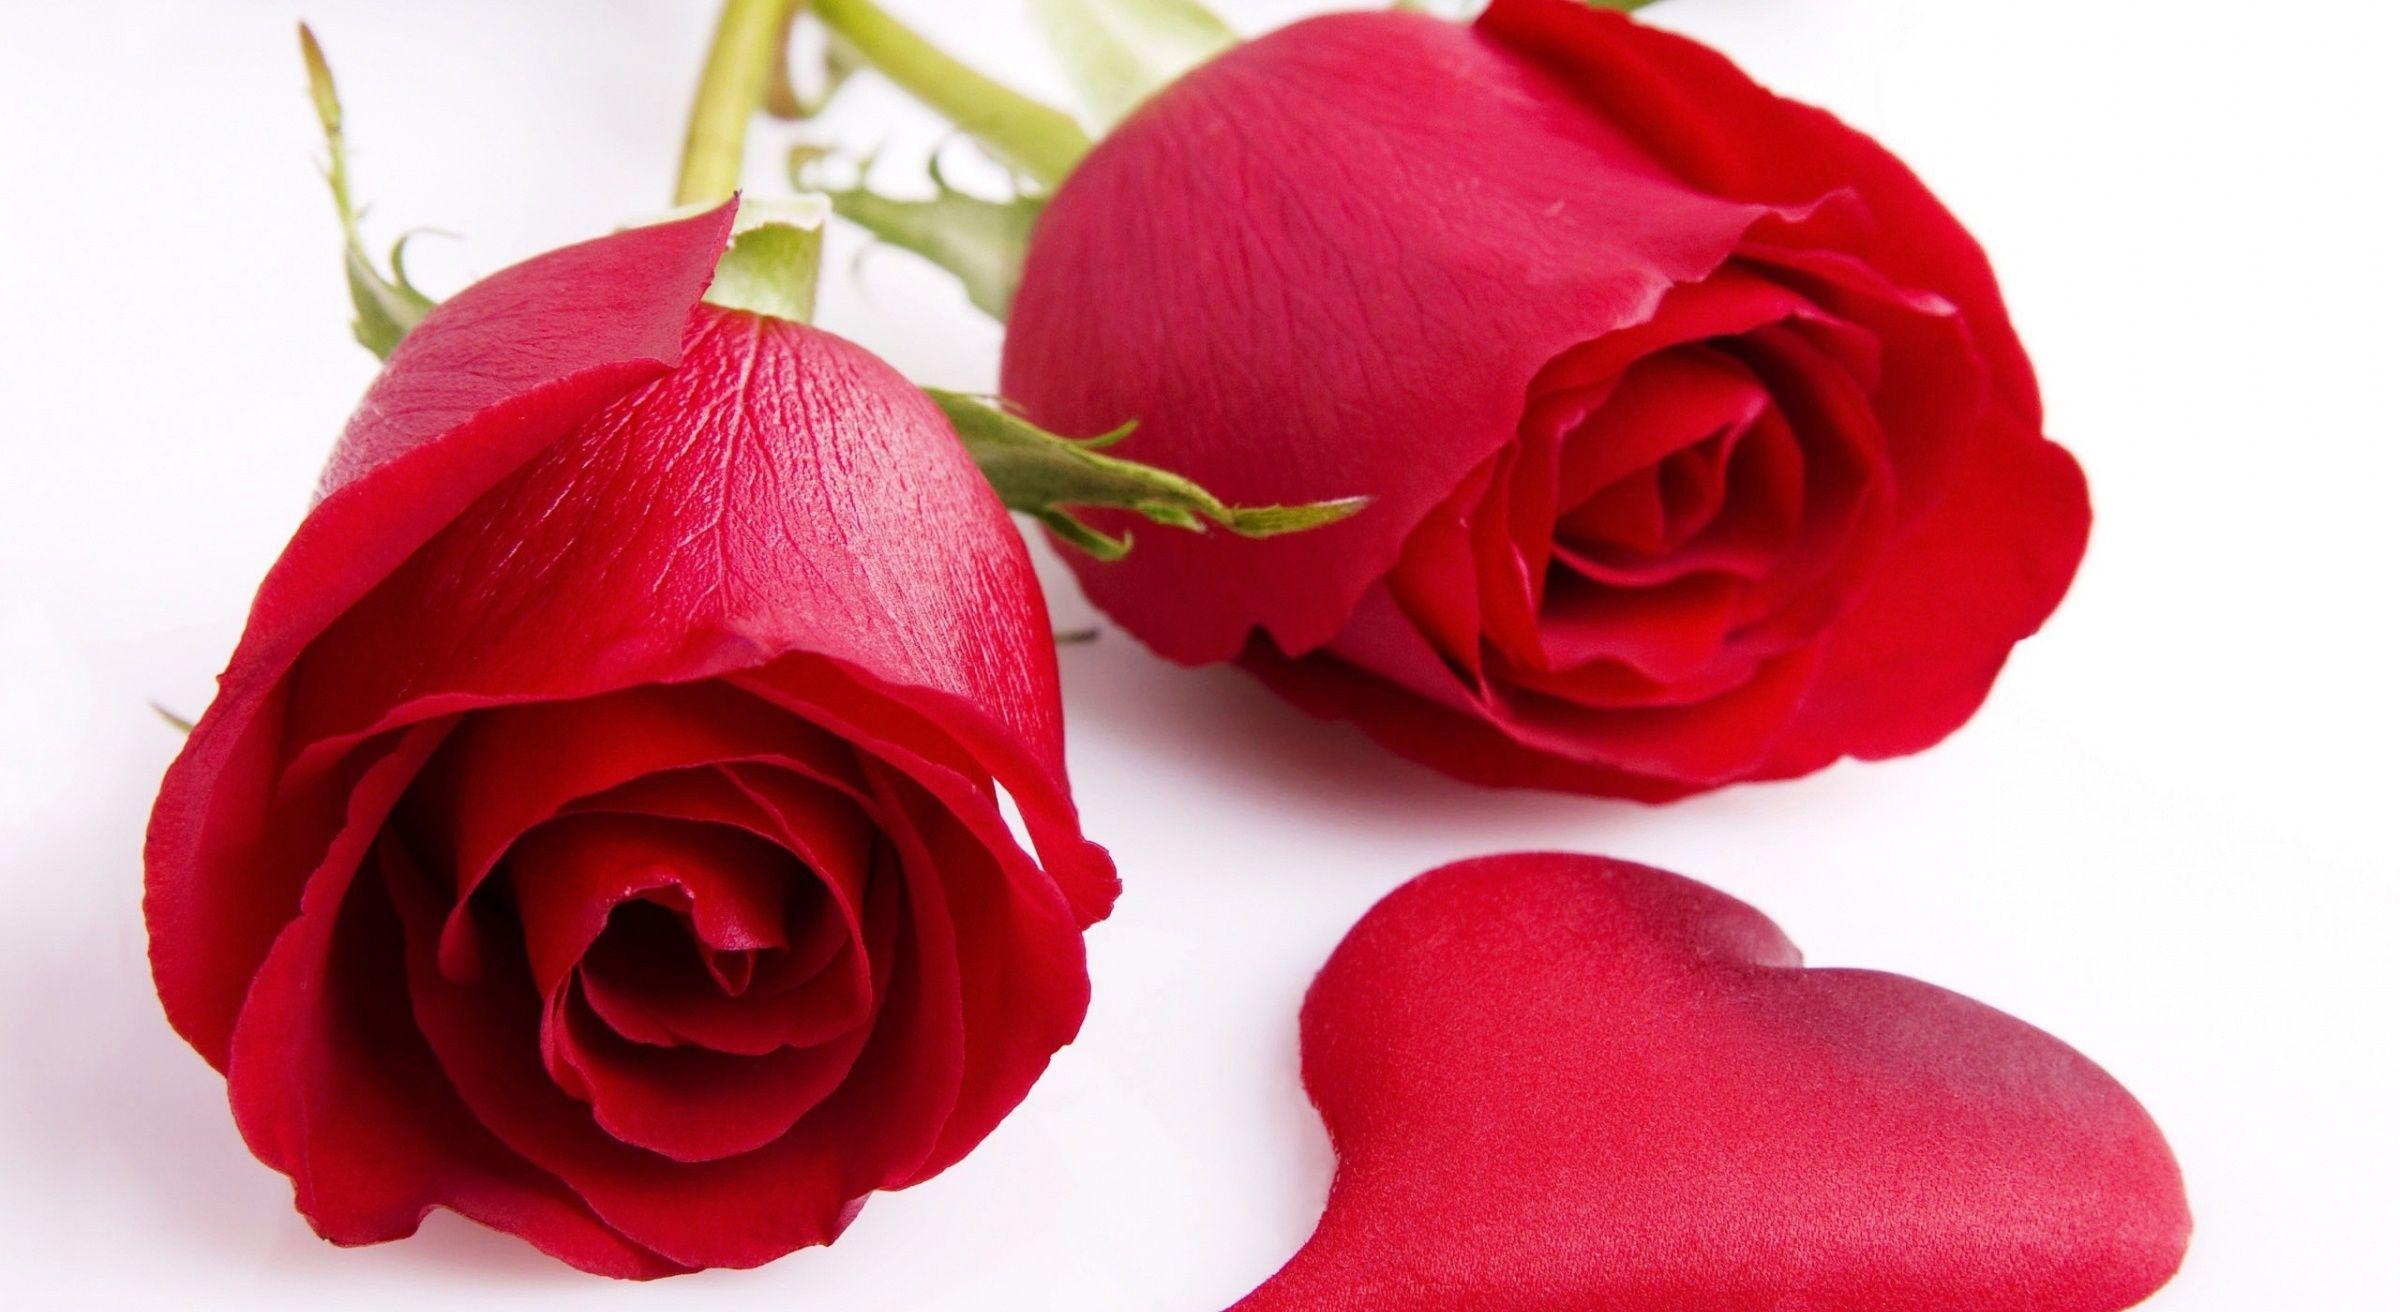 1080p Red Rose Wallpaper, Gallery of 45 1080p Red Rose Background